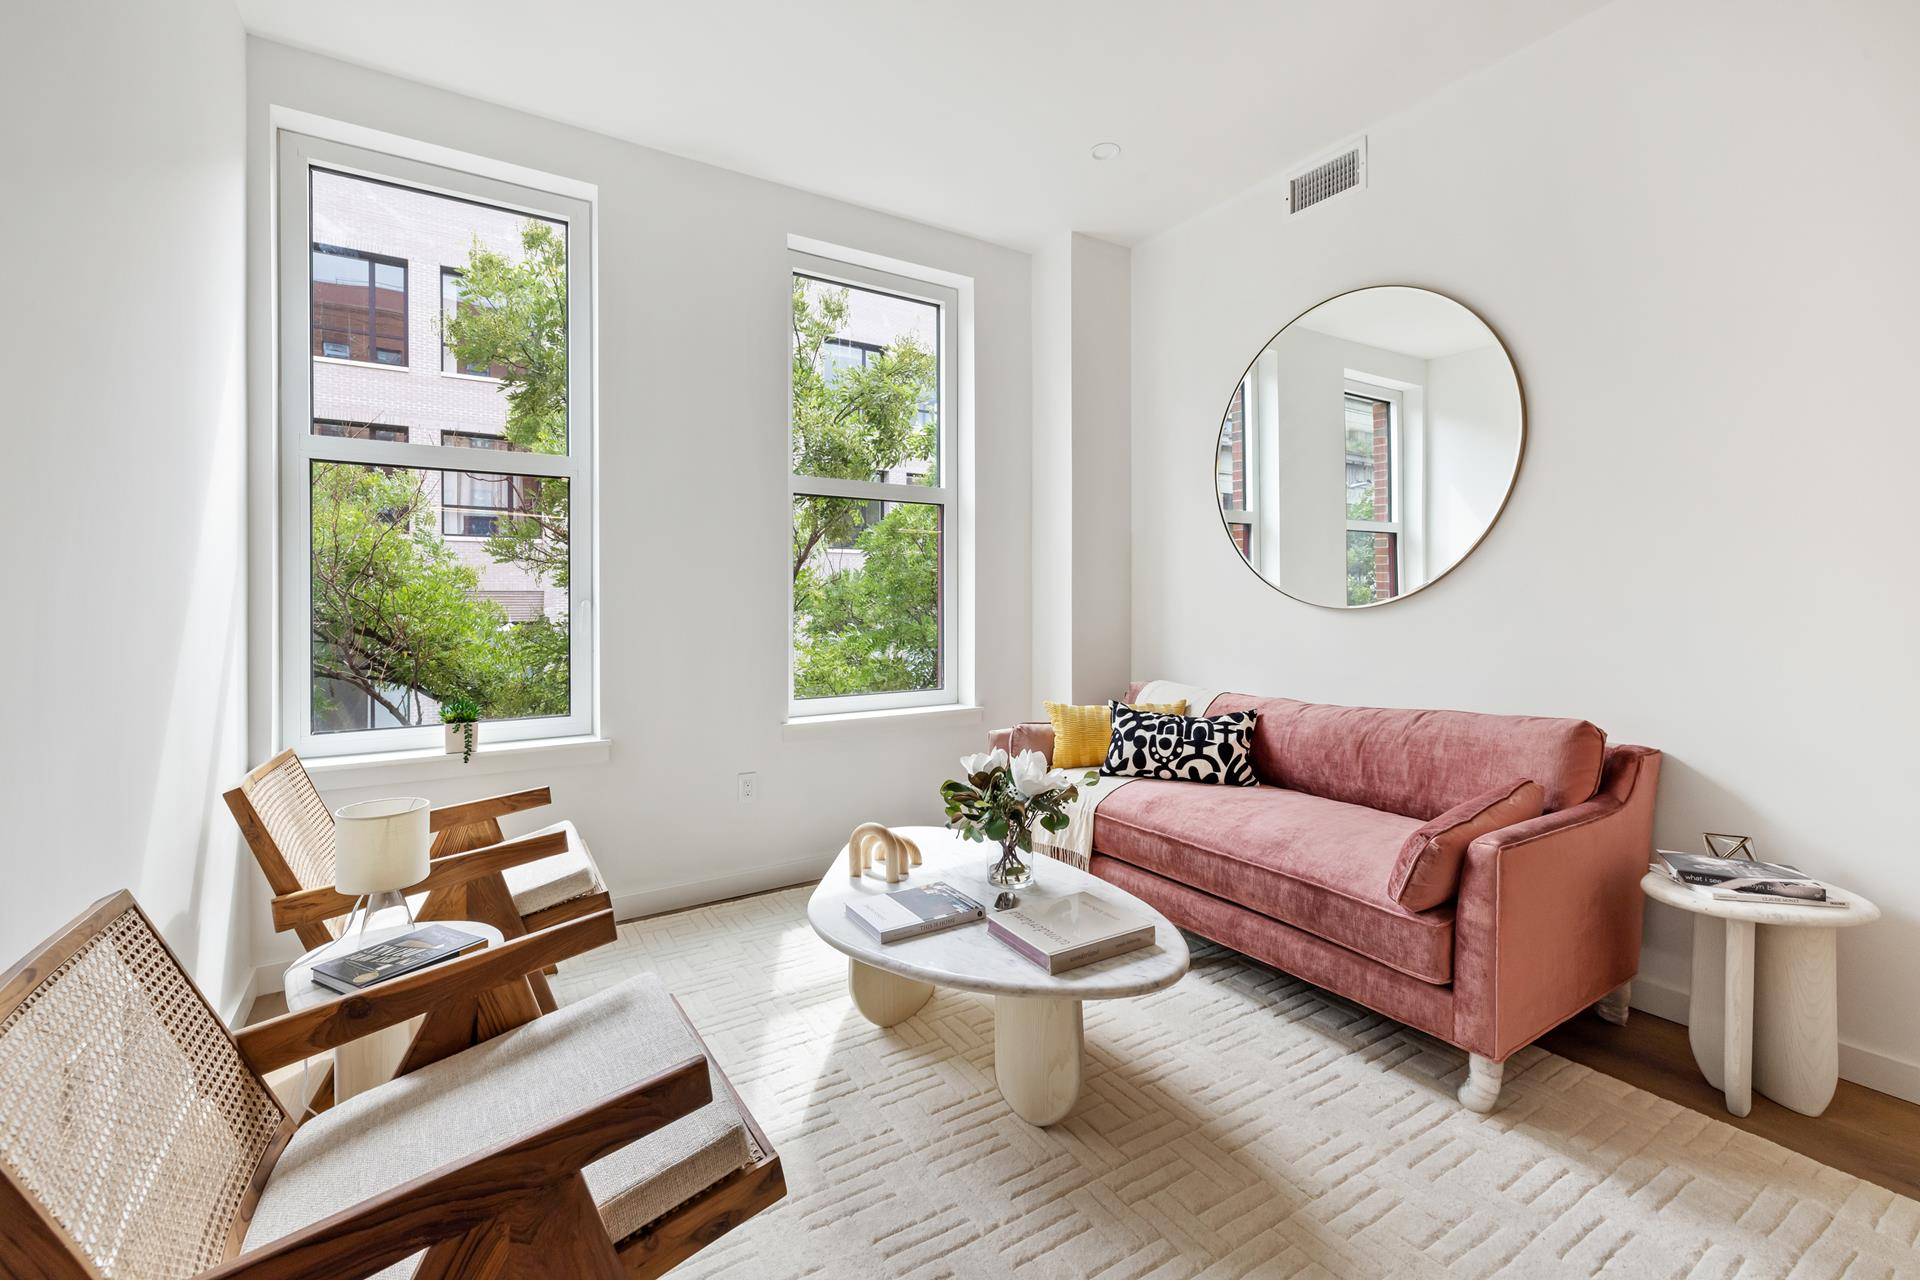 The Calyer Greenpoint Luxury at the heart of the historic district.